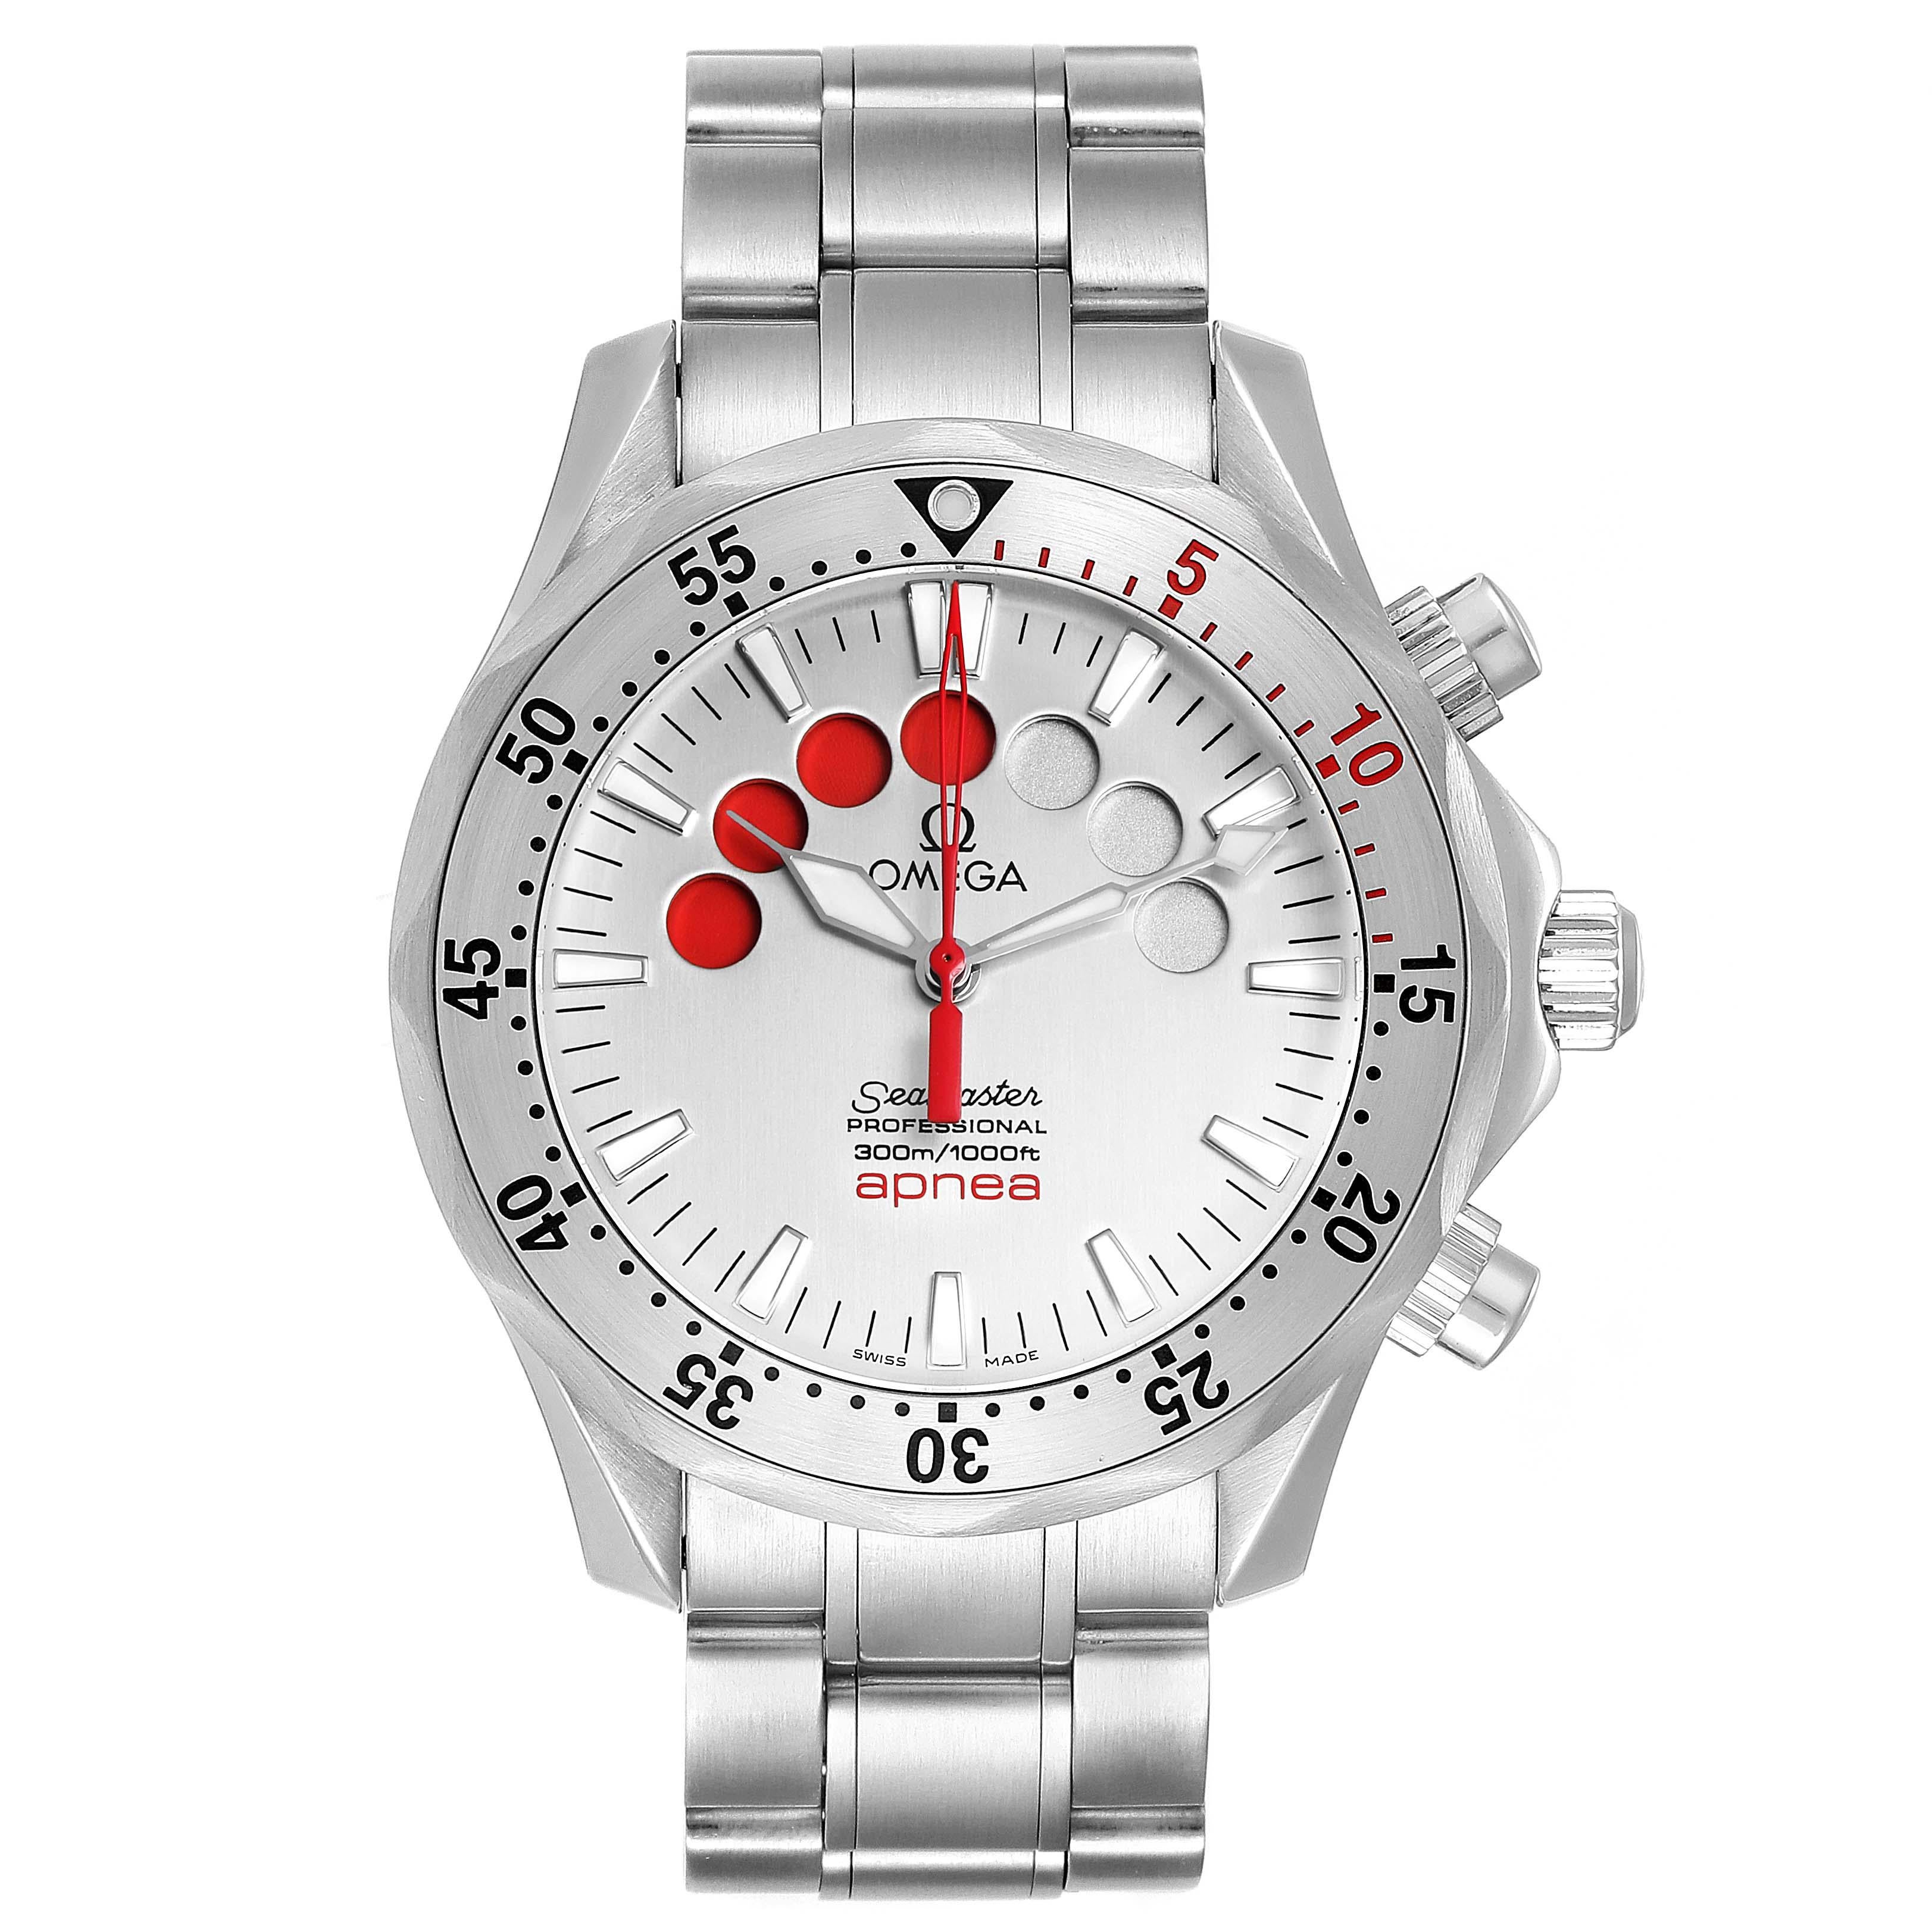 Omega Seamaster Apnea Jacques Mayol Silver Dial Mens Watch 2595.30.00. Automatic self-winding movement. Stainless steel case 42.00 mm in diameter. Omega logo on a crown. 'Jacques Mayol' engraved on case back. Unidirectional rotating stainless steel